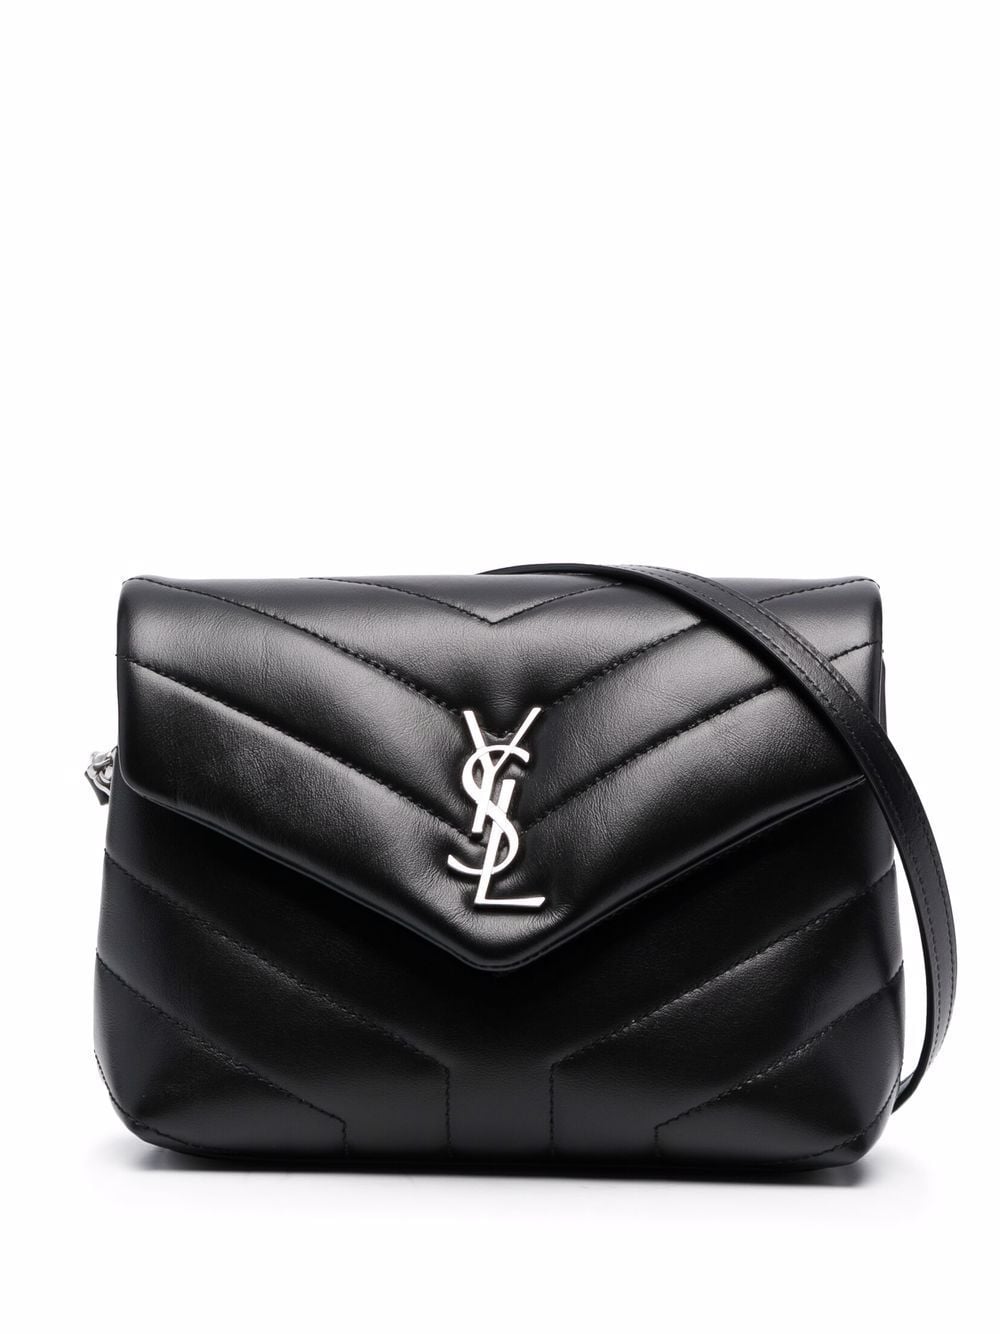 Loulou Toy crossbody bag